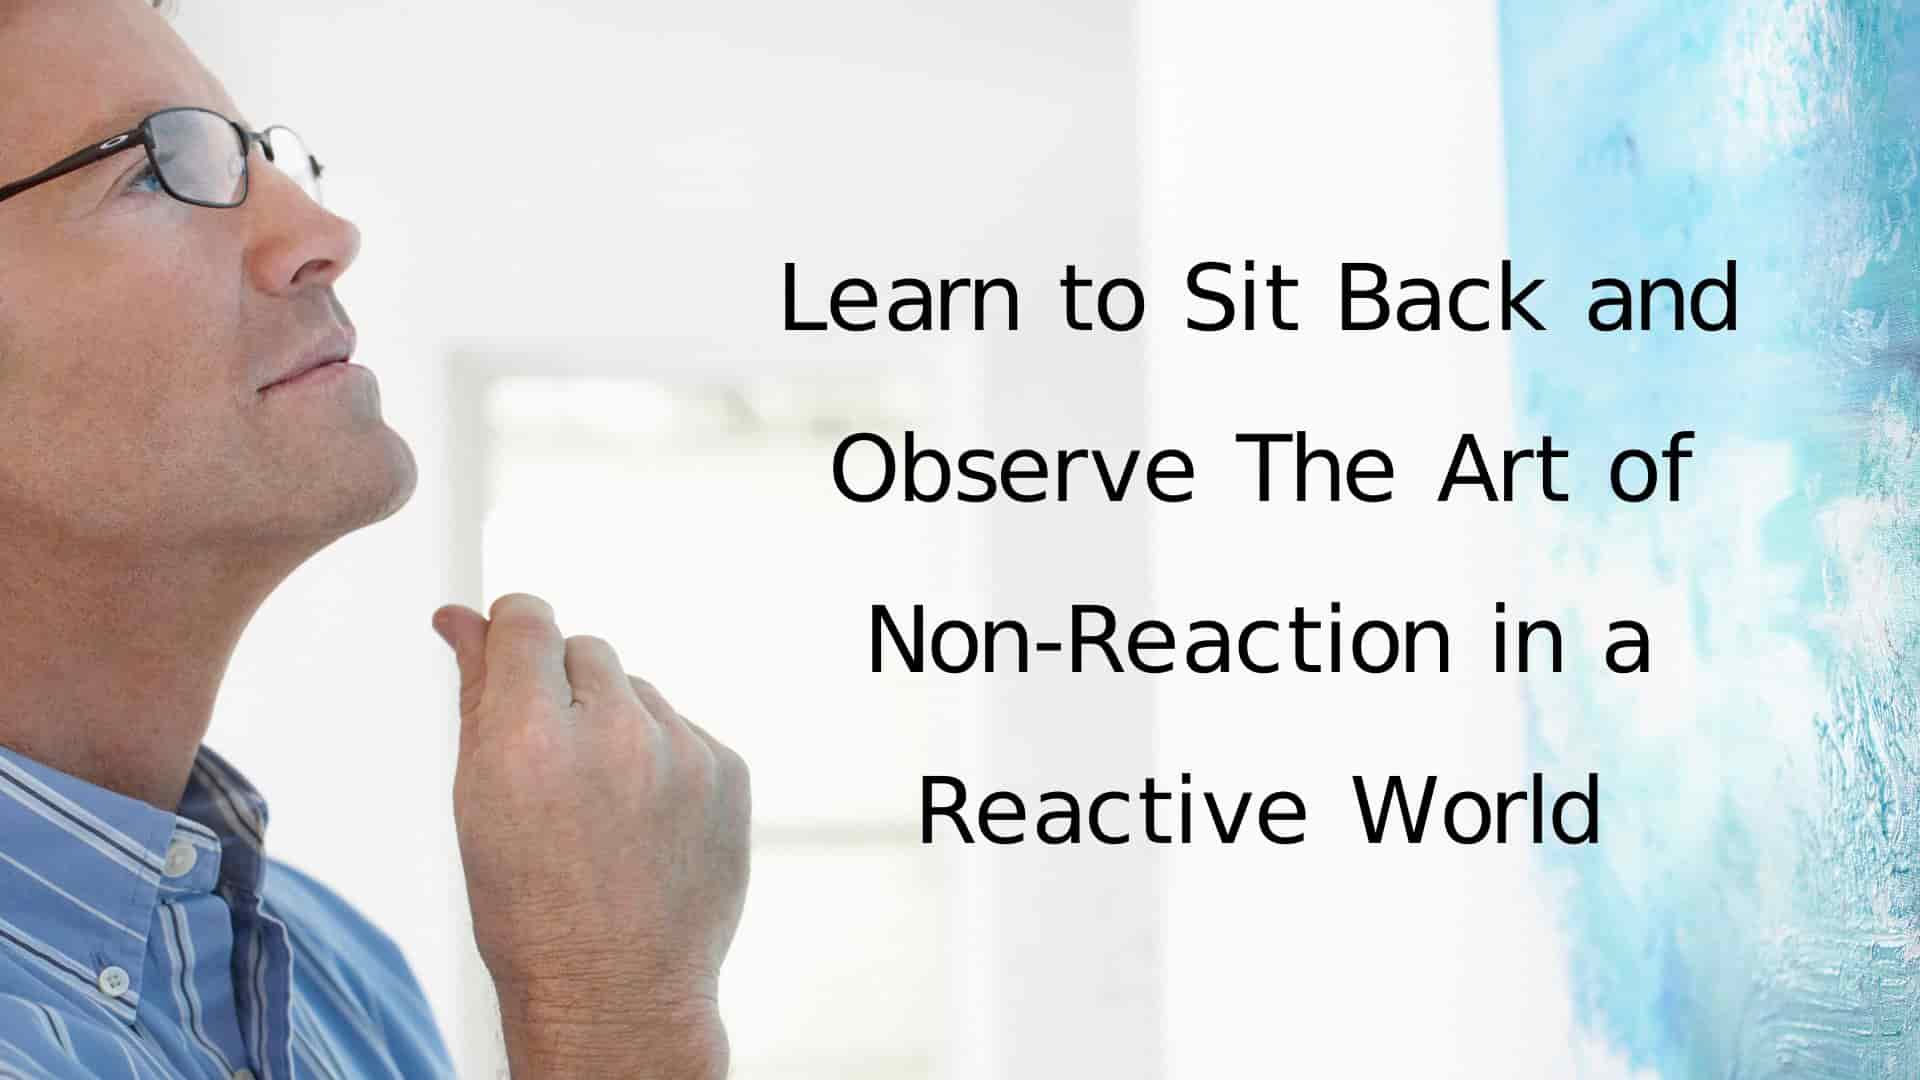 Learn to Sit Back and Observe The Art of Non-Reaction in a Reactive World (1)